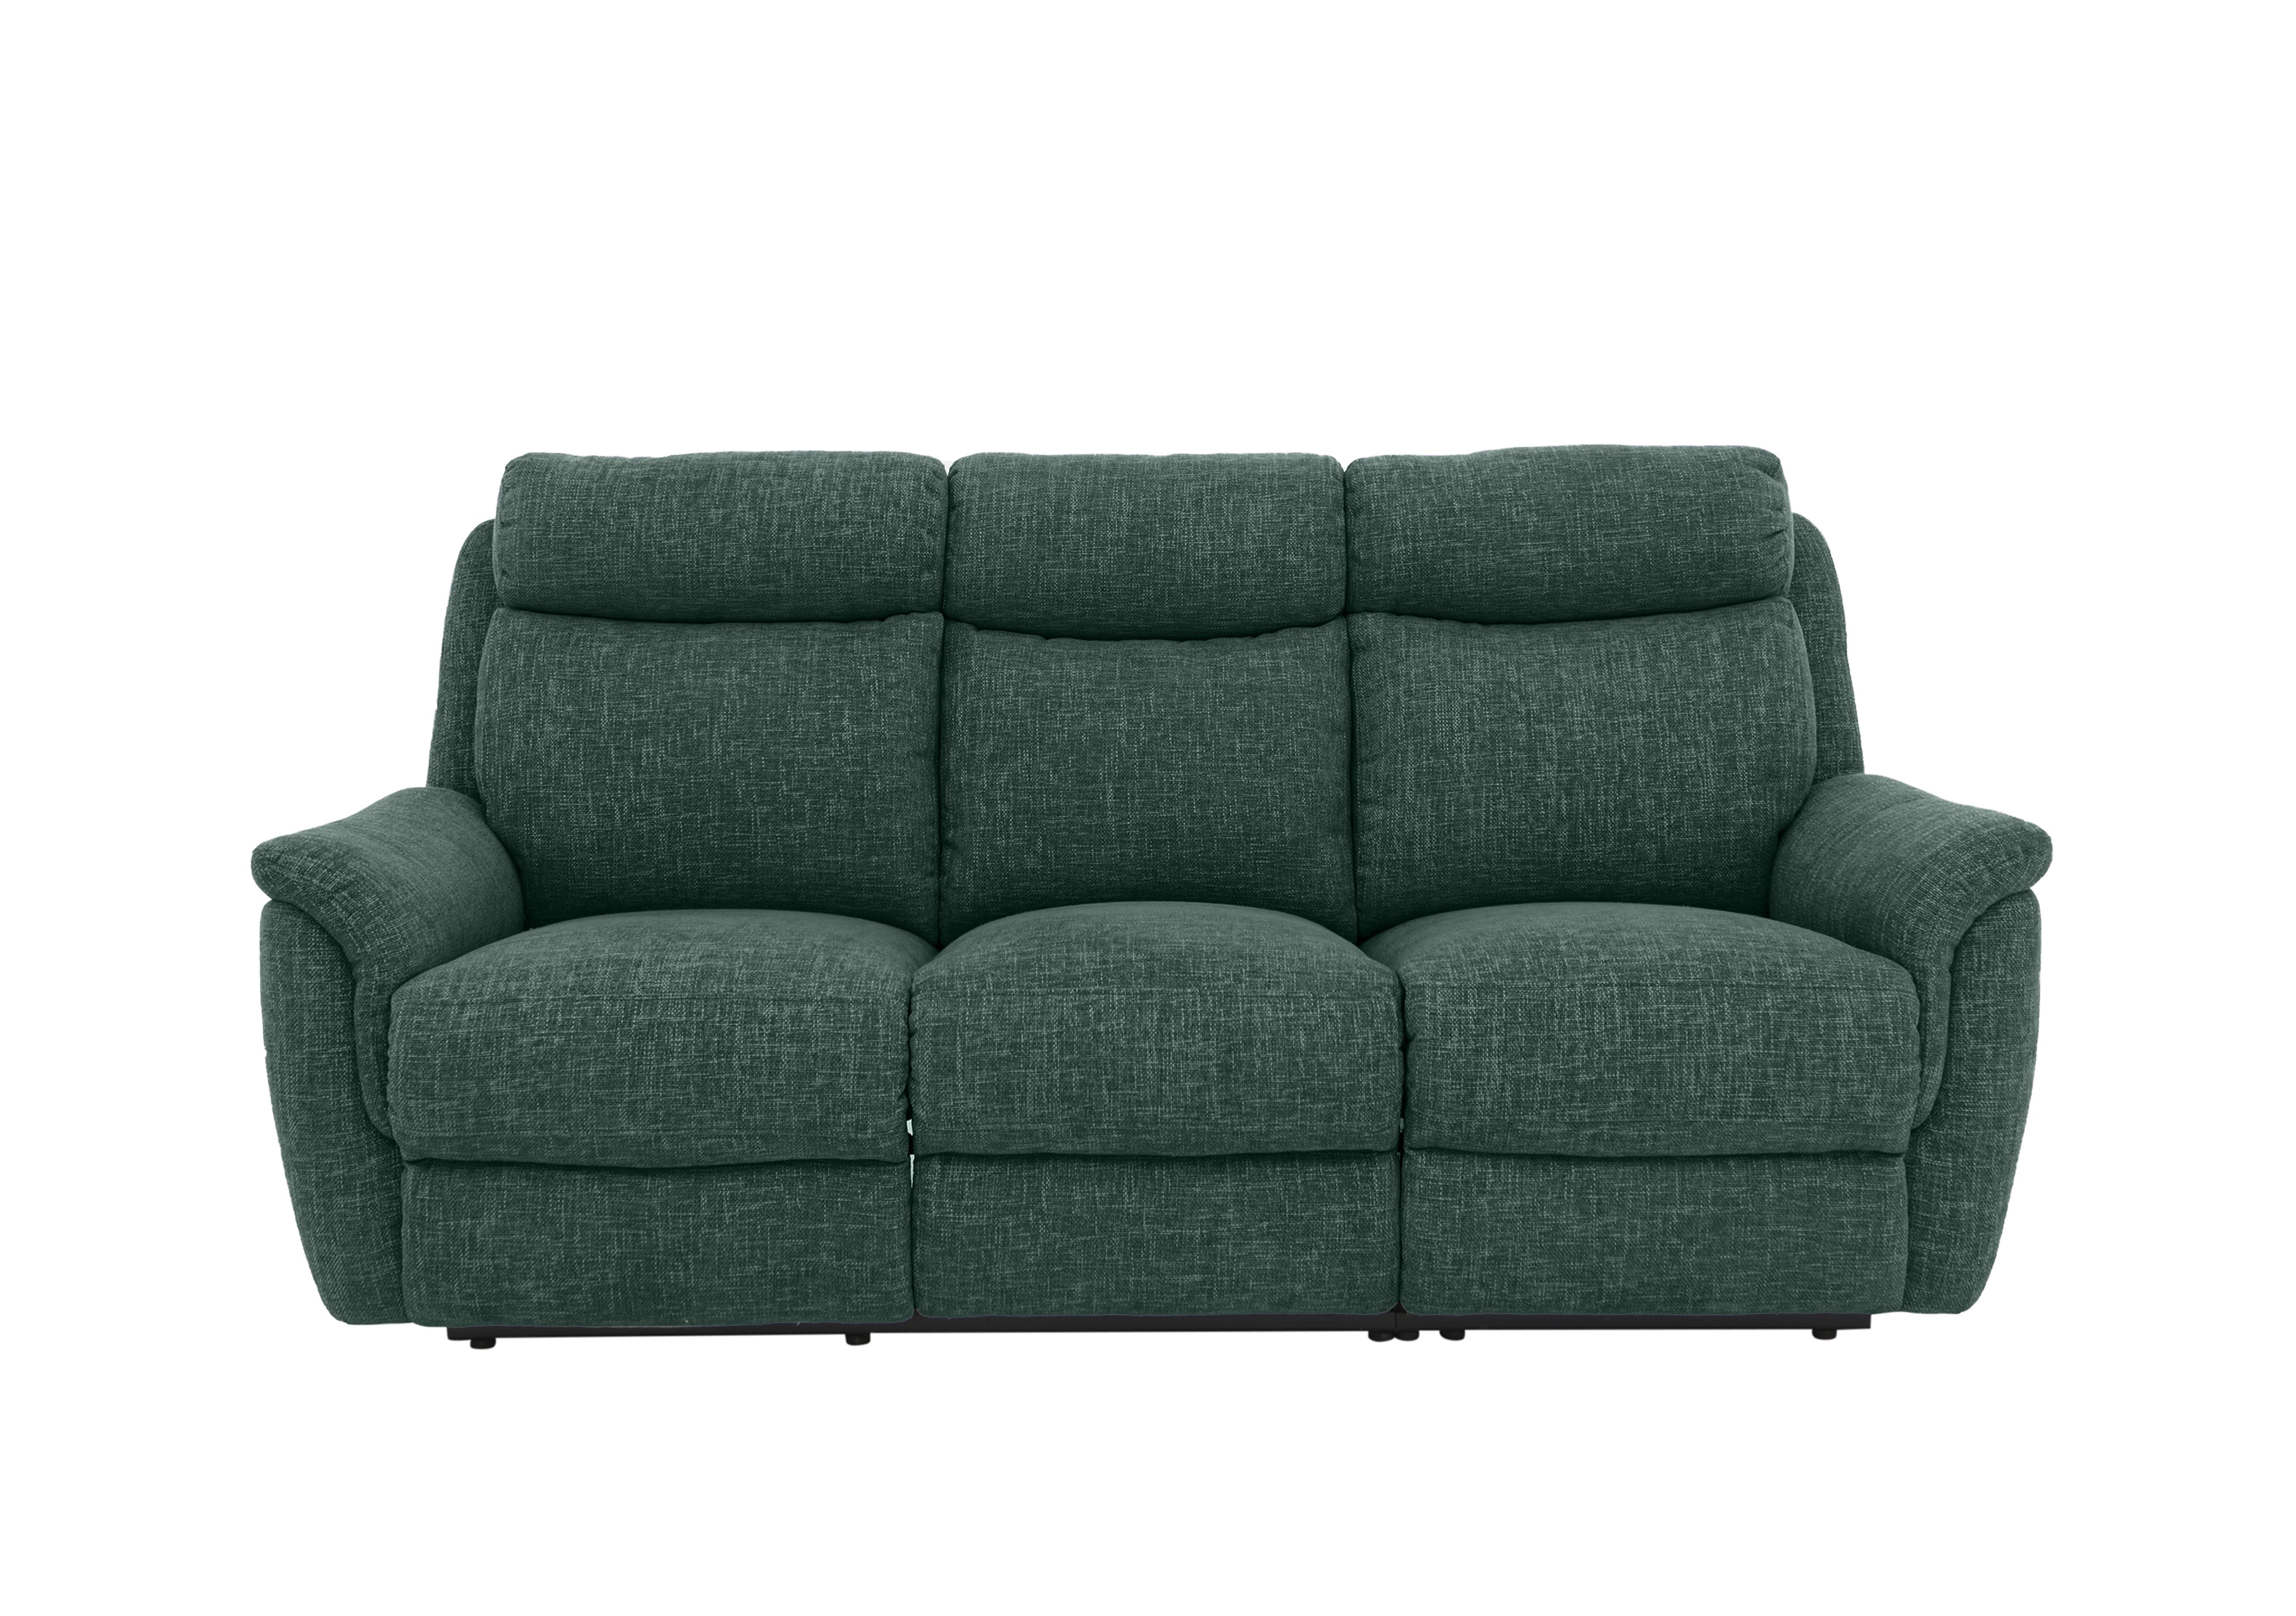 Orlando 3 Seater Fabric Power Recliner Sofa with Power Headrests and Lumbar Support in Anivia Green 19445 on Furniture Village